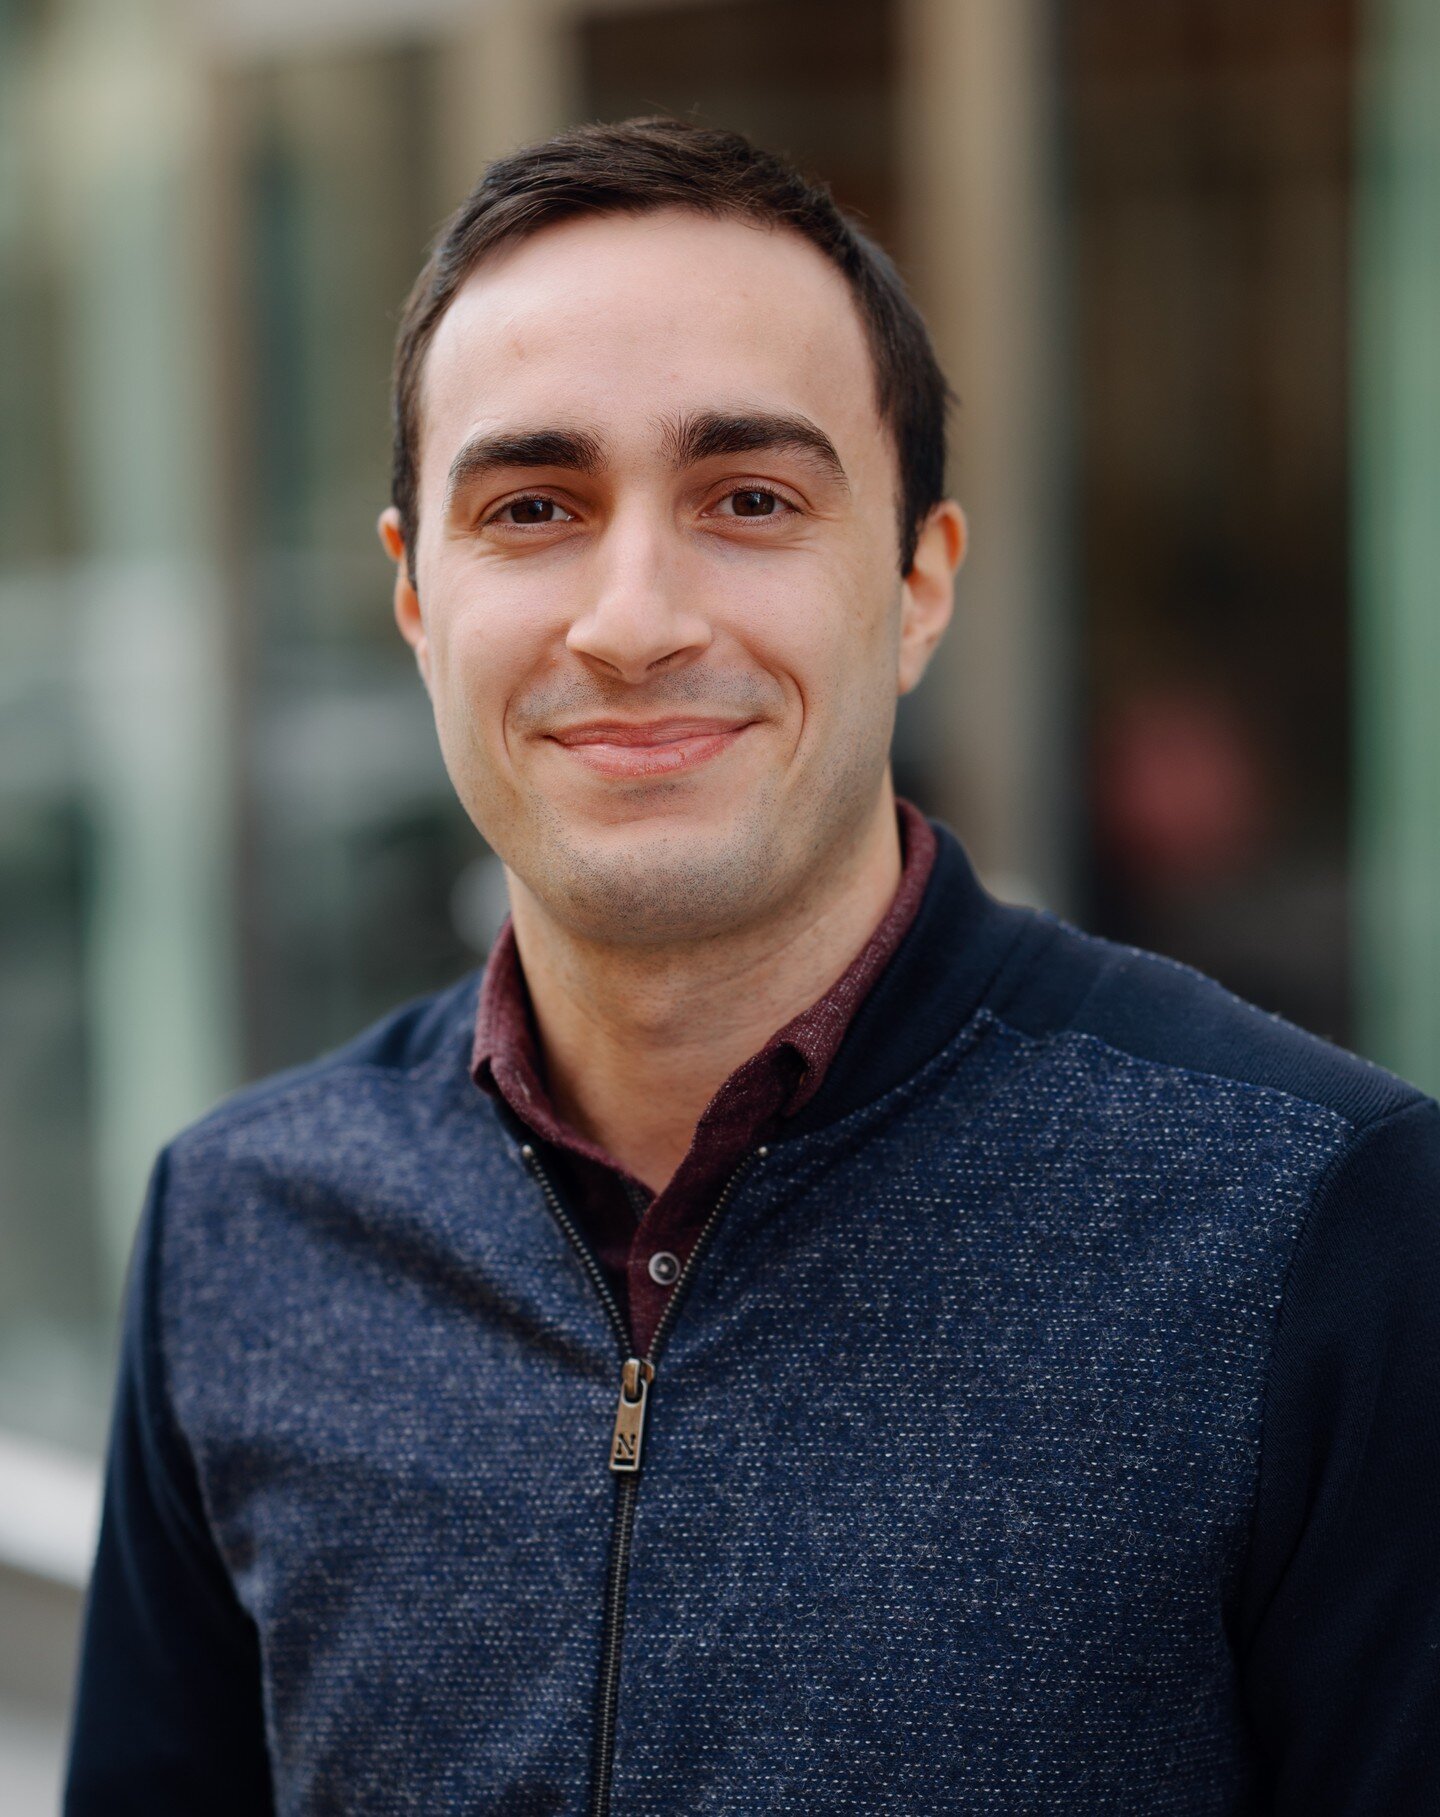 We're so happy to welcome @arifterzioglu to Mirado! 🙌

Arif is an experienced backend developer and has most recently been working within the e-commerce industry. So excited to have you on board! 🥳